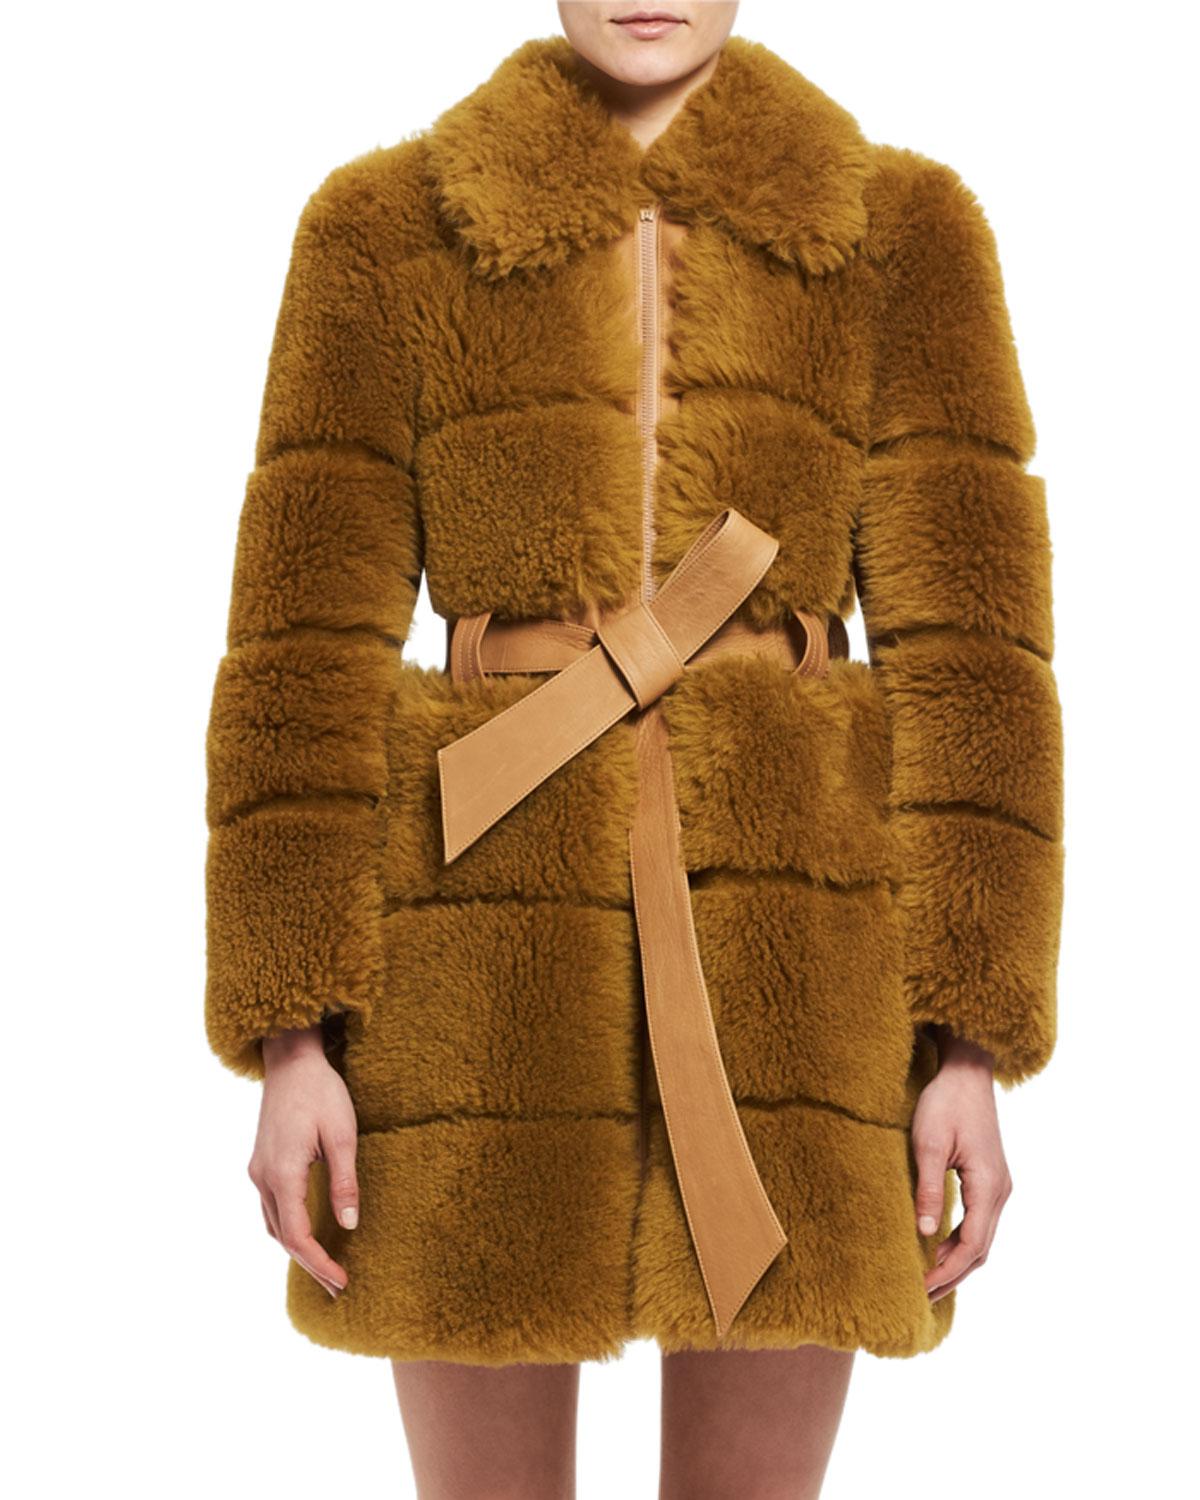 Chloé Quilted Shearling Fur Coat in Brown - Lyst